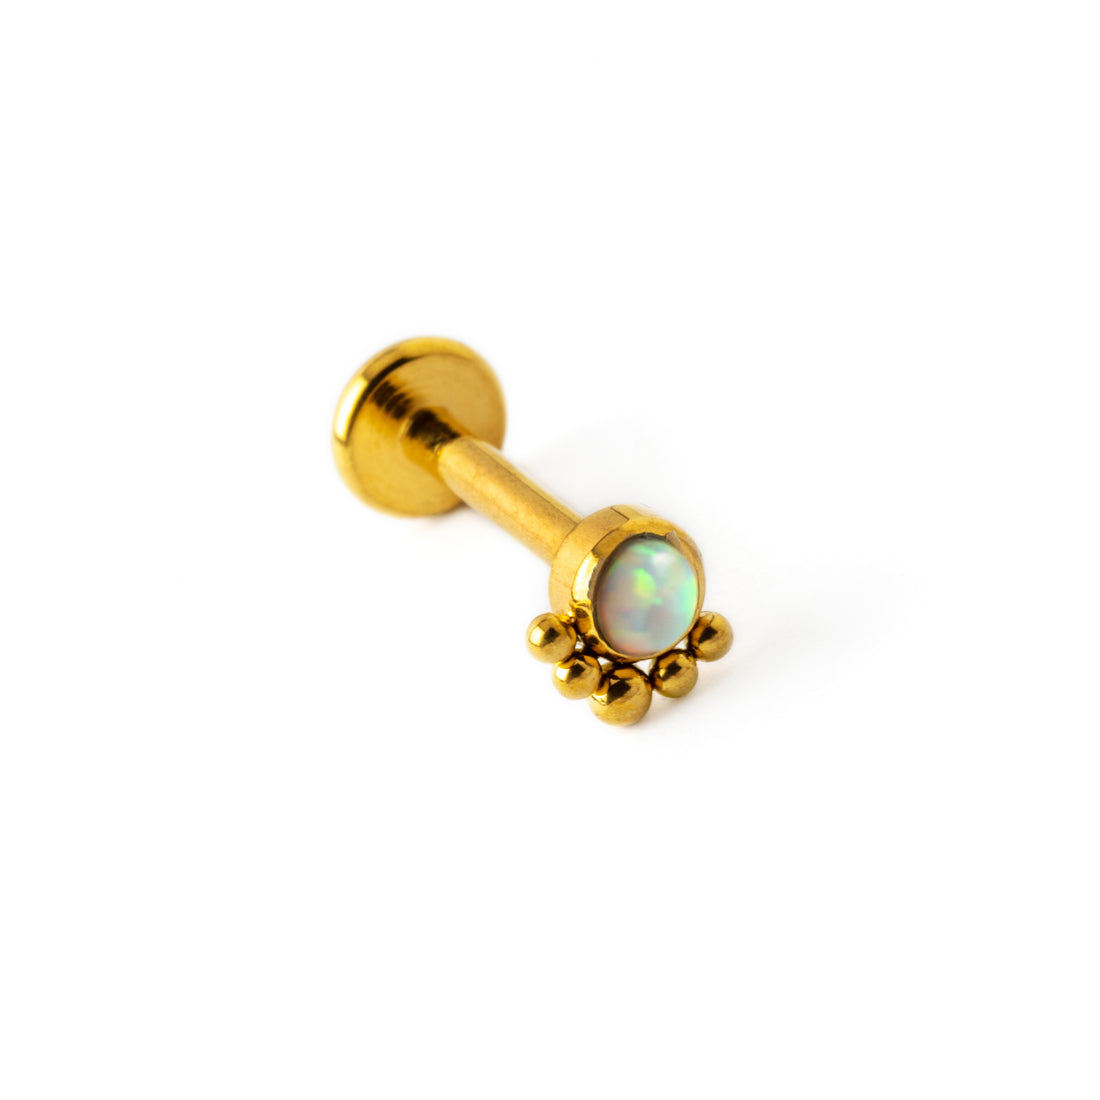 Layla golden surgical steel internally threaded labret with white opal left side view